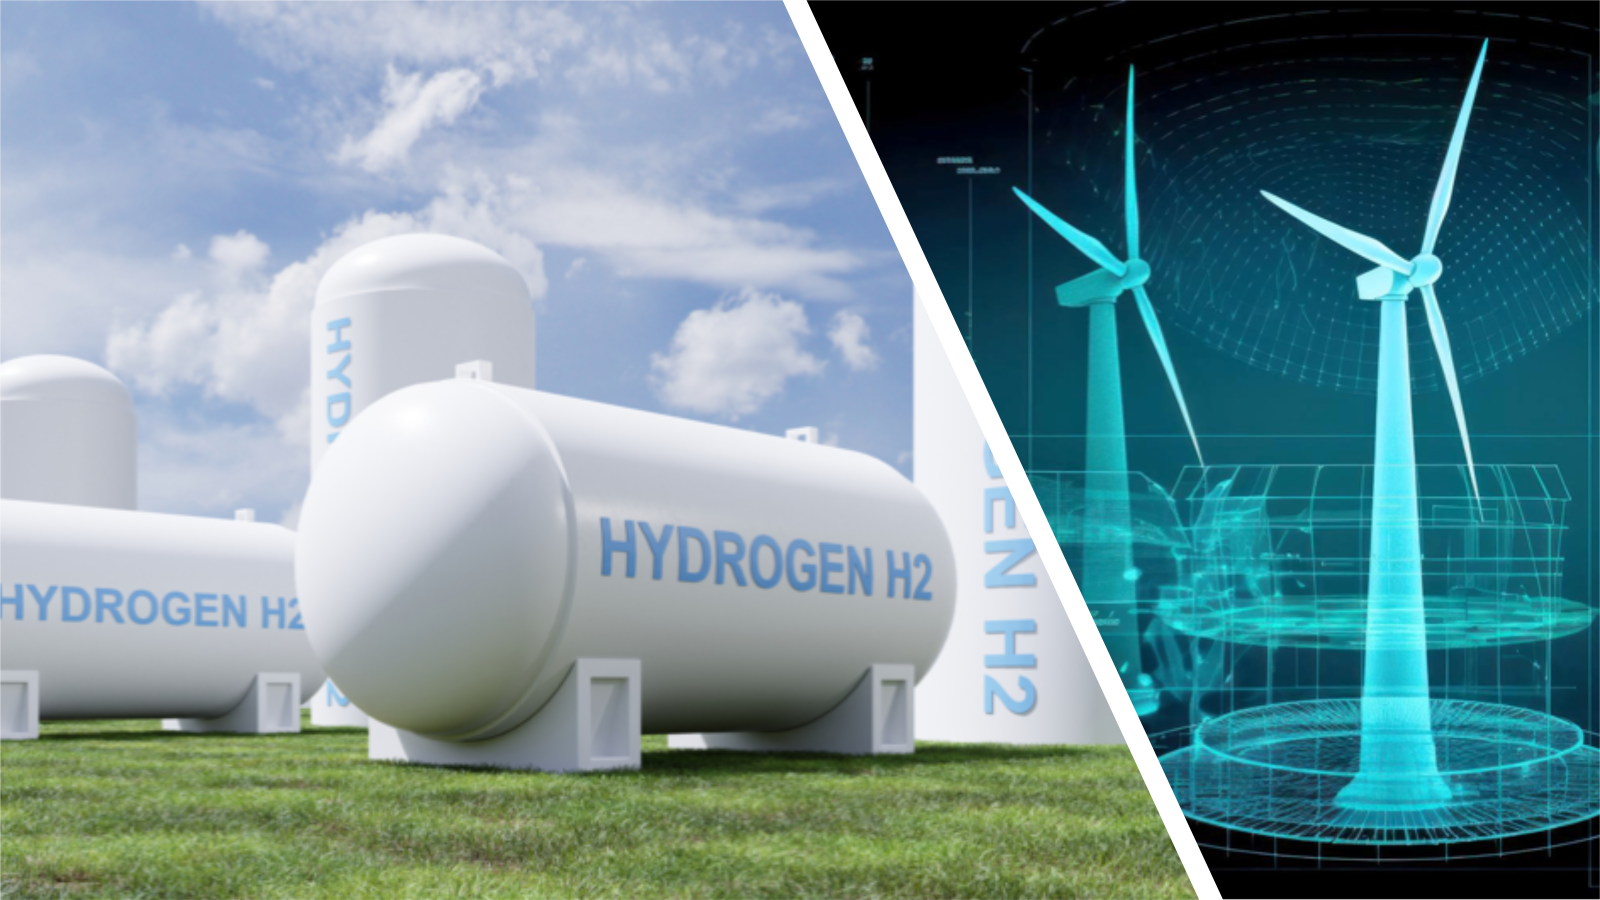 Digital twins: Seizing value from megaprojects in renewable hydrogen